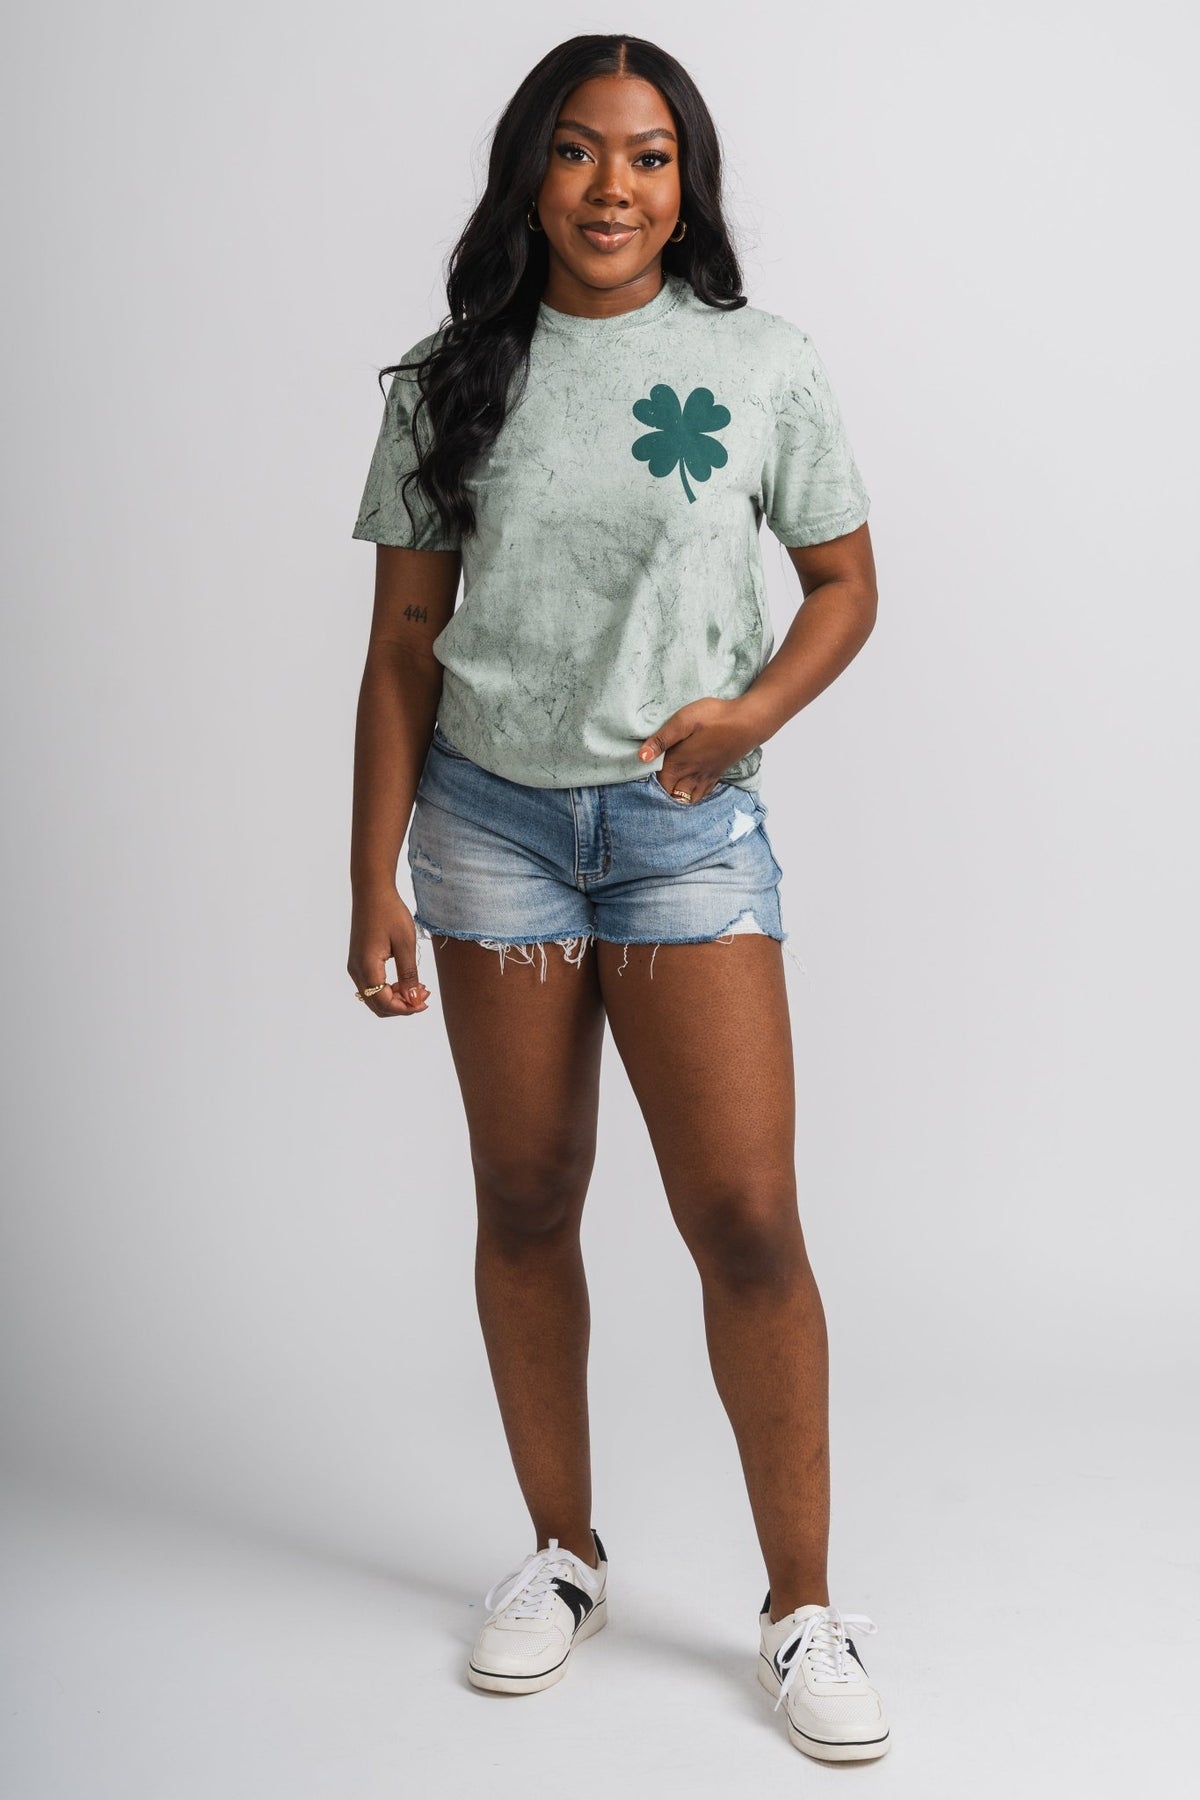 Clover pocket t-shirt fern green - Trendy T-Shirts for St. Patrick's Day at Lush Fashion Lounge Boutique in Oklahoma City